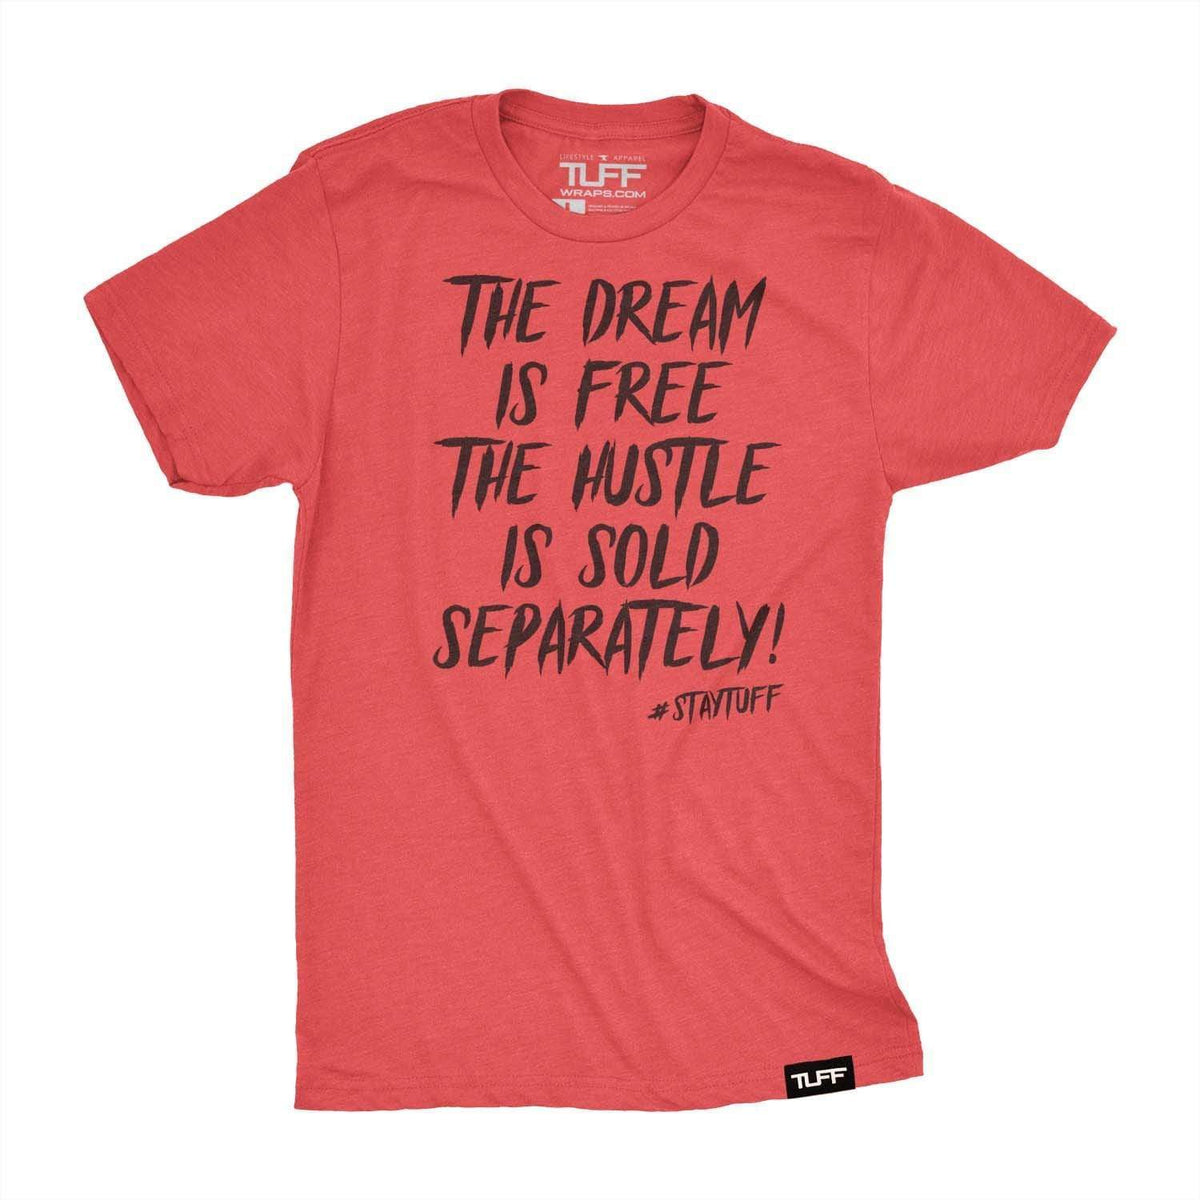 The Dream Is Free The Hustle Is Sold Separately Tee S / Vintage Red TuffWraps.com